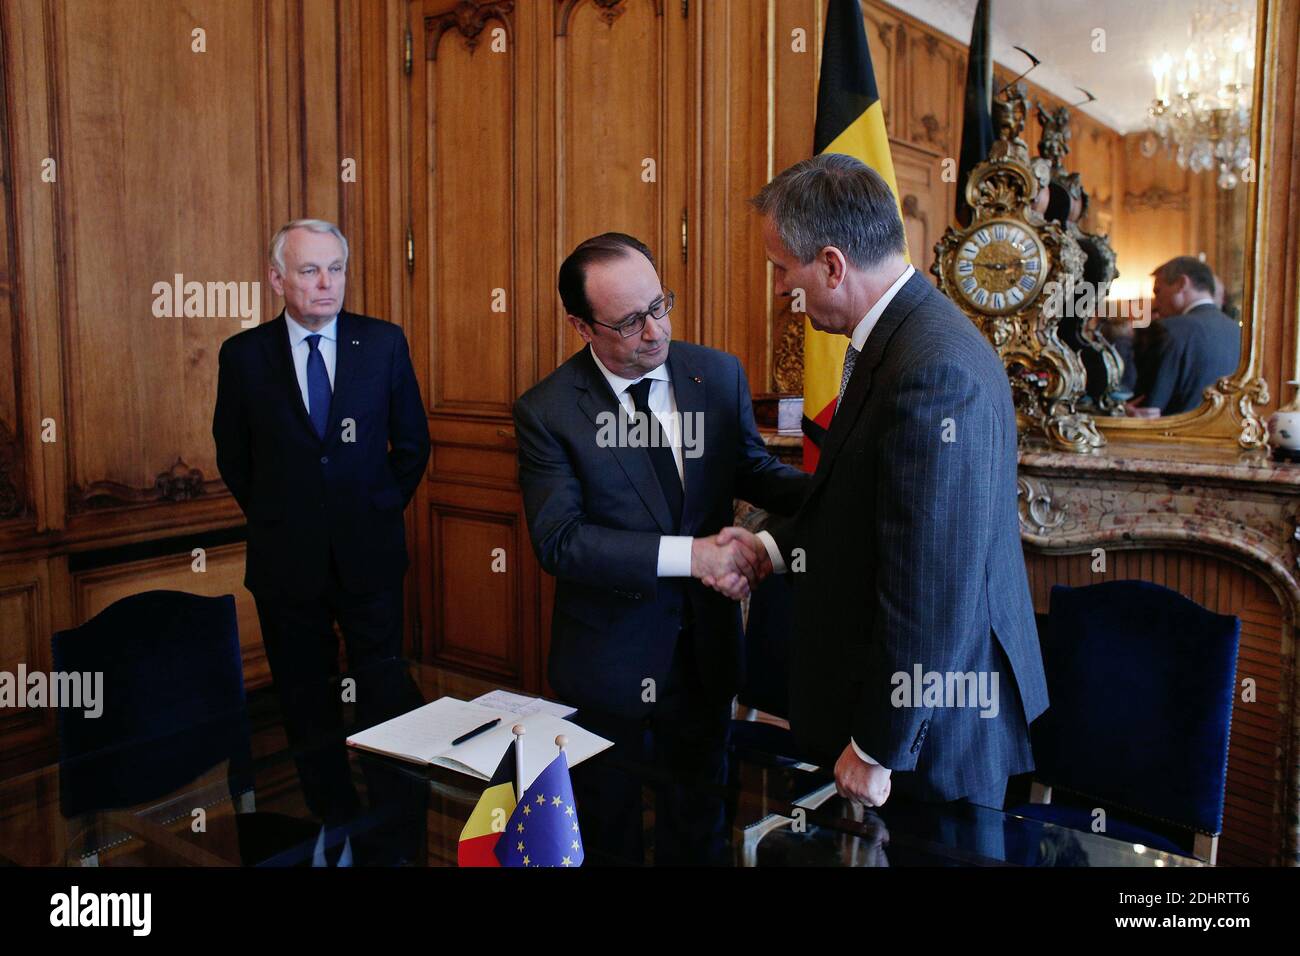 France's President Francois Hollande (C) shakes hands with Belgium's Ambassador to France Vincent Mertens de Wilmars as French Minister of Foreign Affairs and International Development Jean-Marc Ayrault looks on after paying homage to the victims of the Brussels terror attacks, at the Belgium embassy in Paris, France on Tuesday, March 22, 2016. Bombs exploded at the Brussels airport and one of the city's metro stations earlier today, killing at least 34 and injuring dozens of people. The Islamic State group claimed responsibility for the attacks. Photo by Thibault Camus/Pool/ABACAPRESS.COM Stock Photo